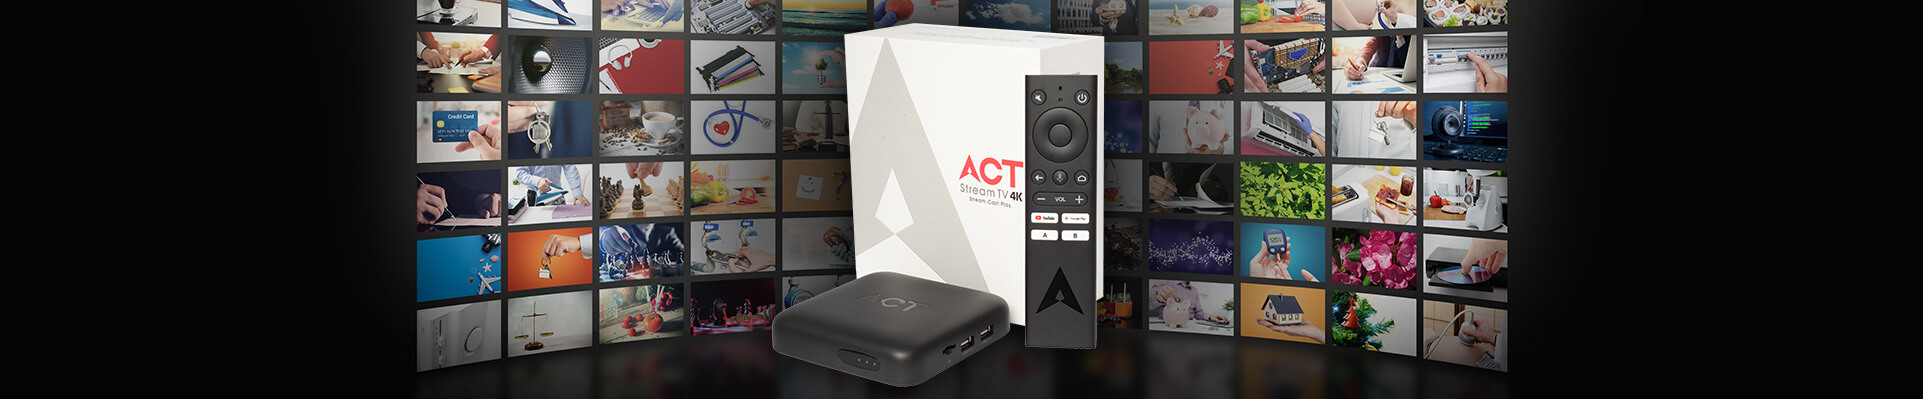 Top 8 Fun things to do with ACT Stream TV 4K